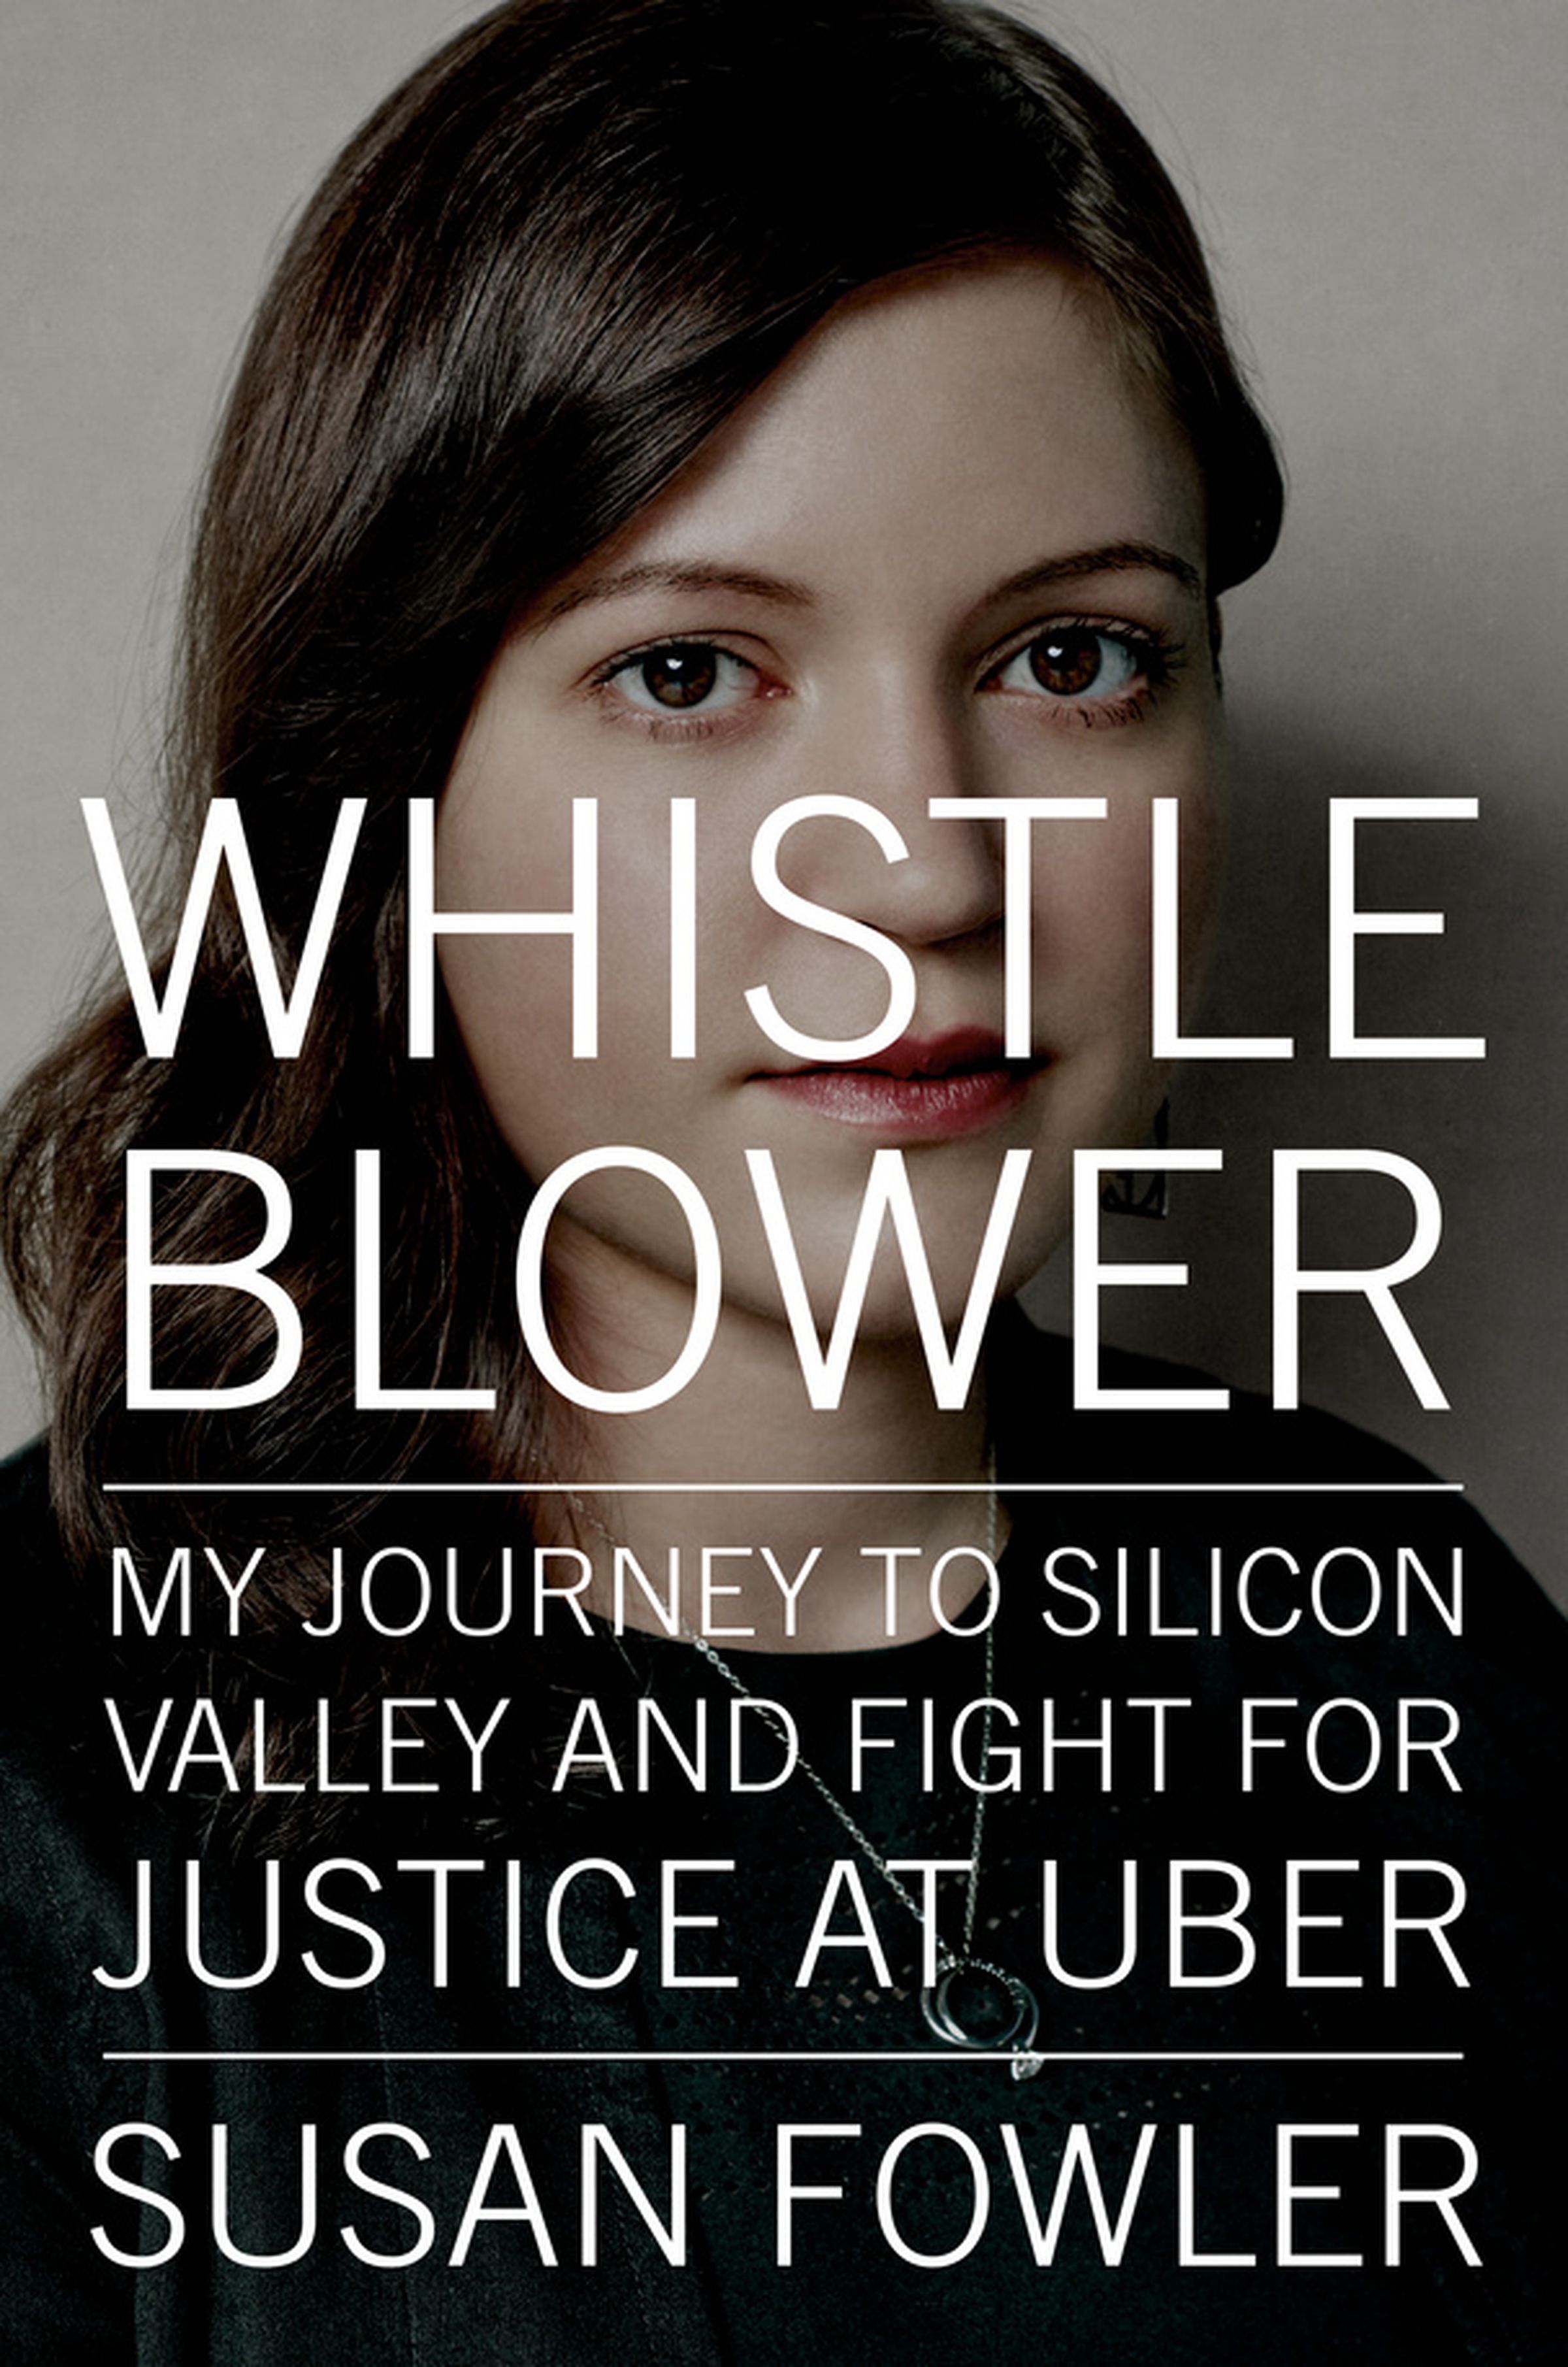 Susan Fowler’s memoir ‘Whistleblower: My Journey to Silicon Valley and Fight for Justice at Uber’